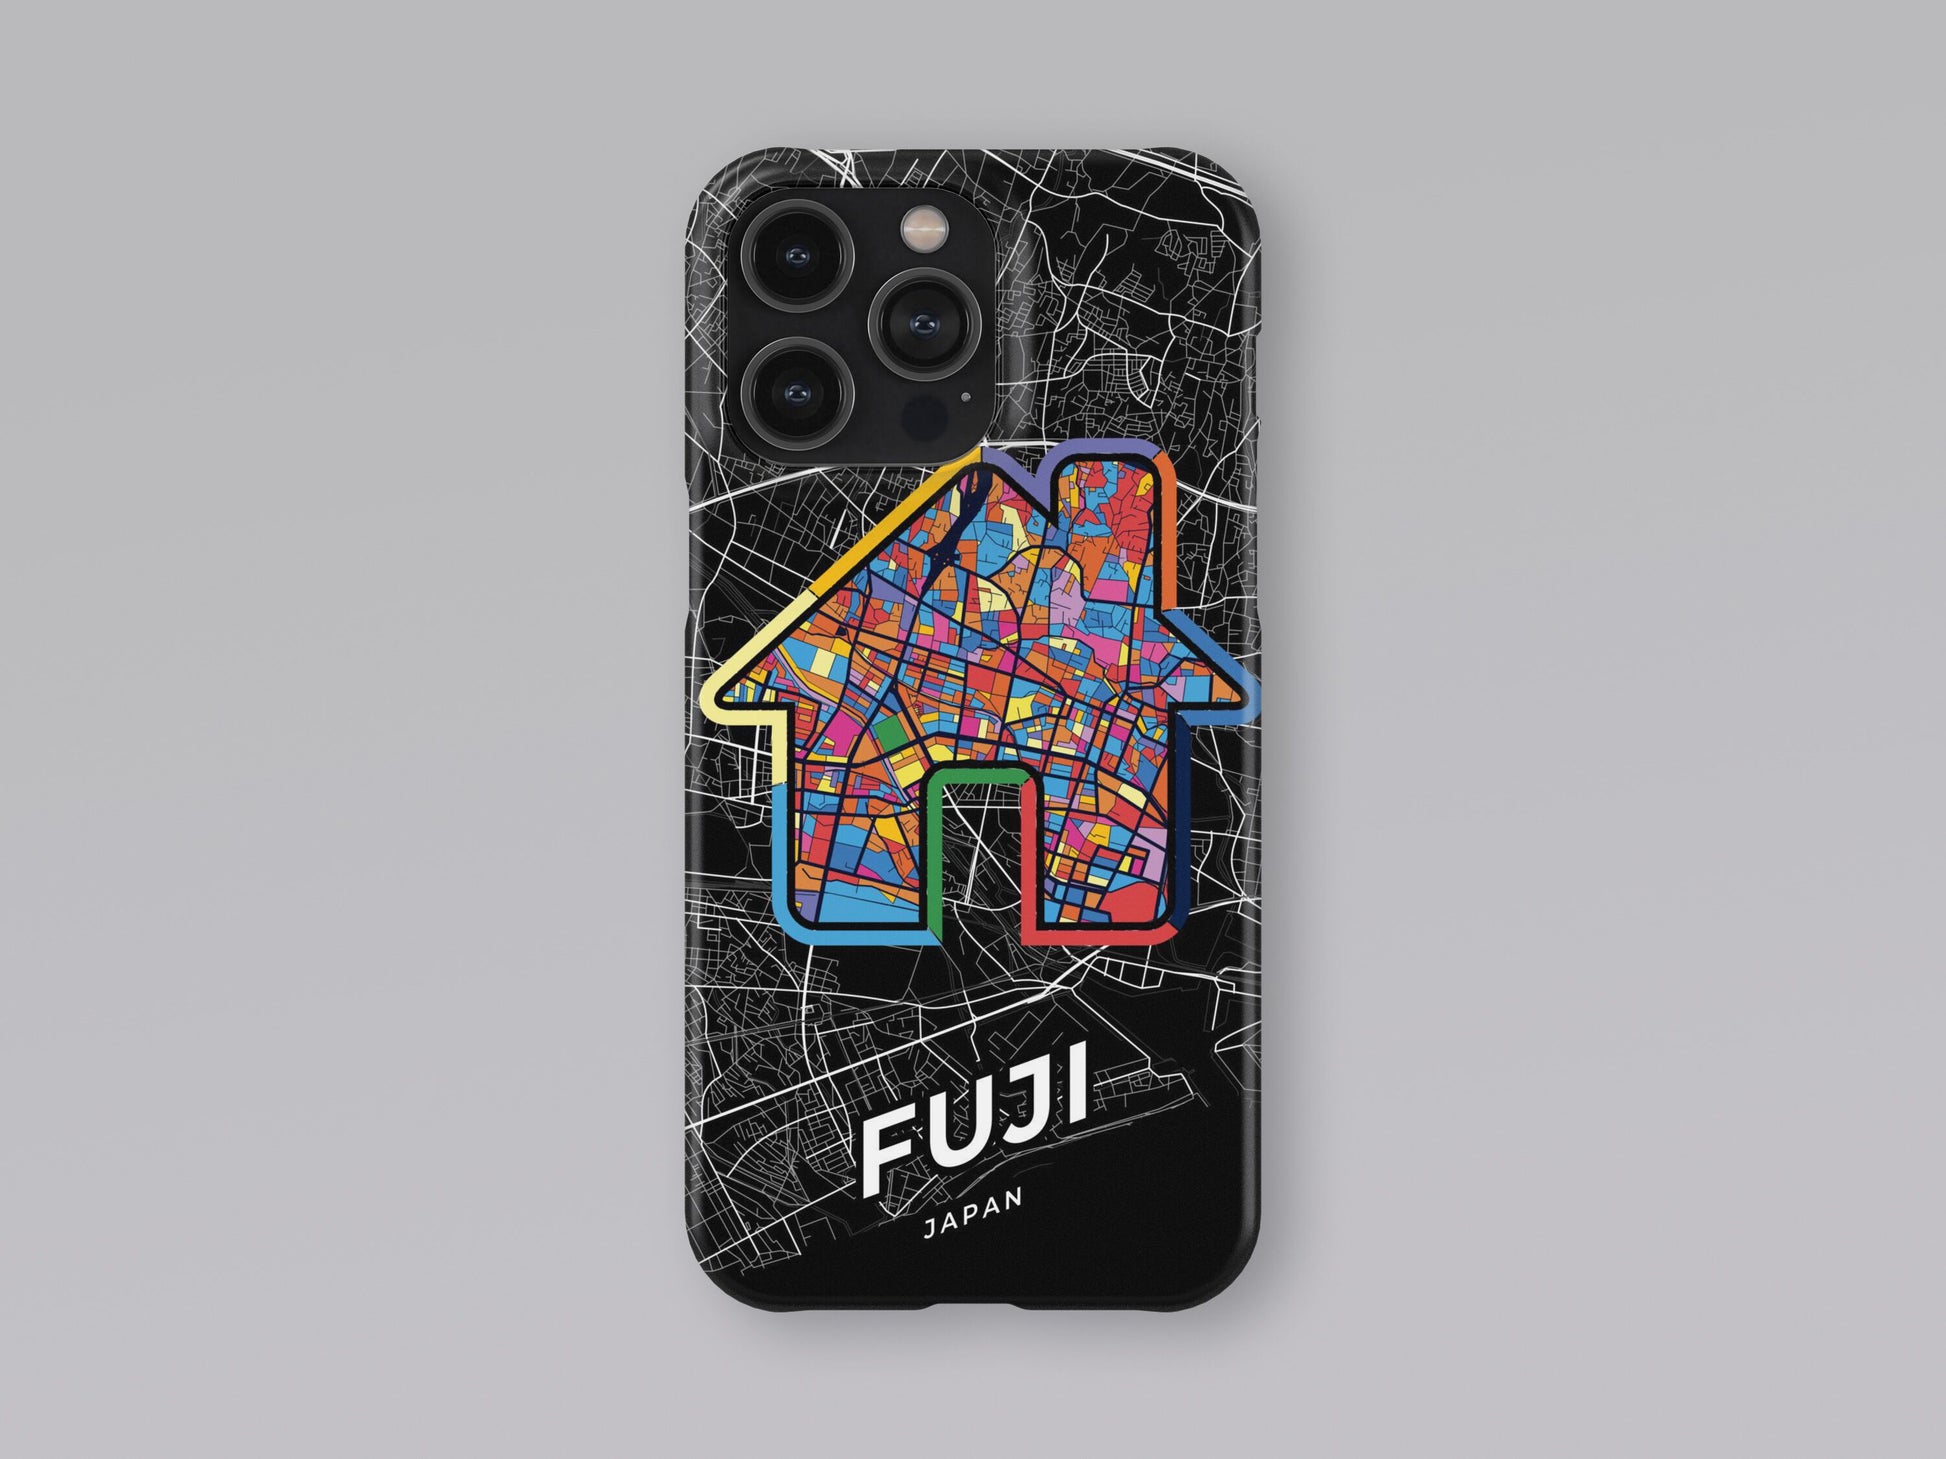 Fuji Japan slim phone case with colorful icon. Birthday, wedding or housewarming gift. Couple match cases. 3